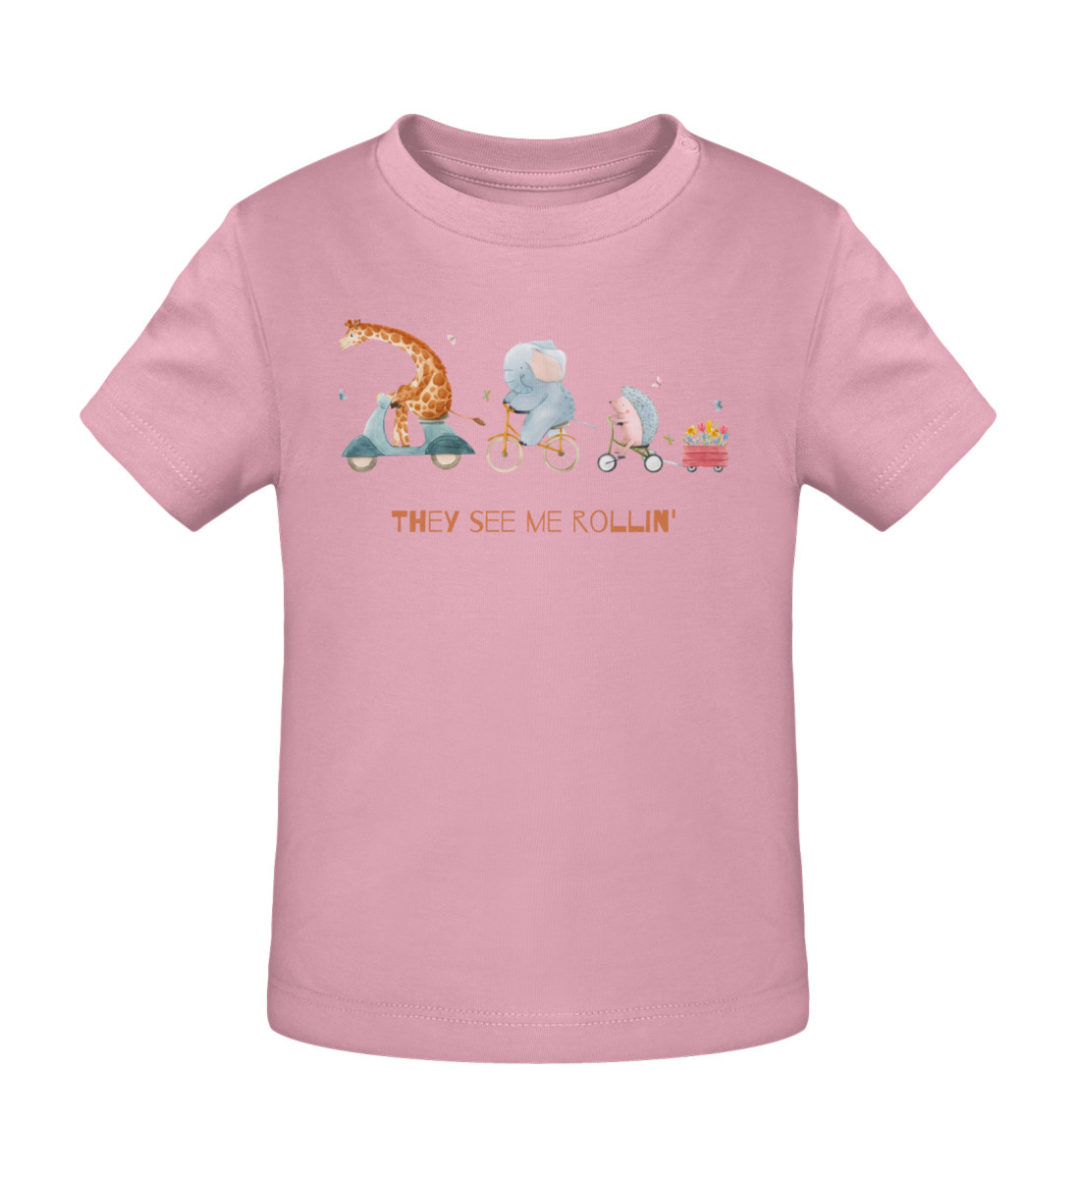 They see me rollin- - Baby Creator T-Shirt ST/ST-6883